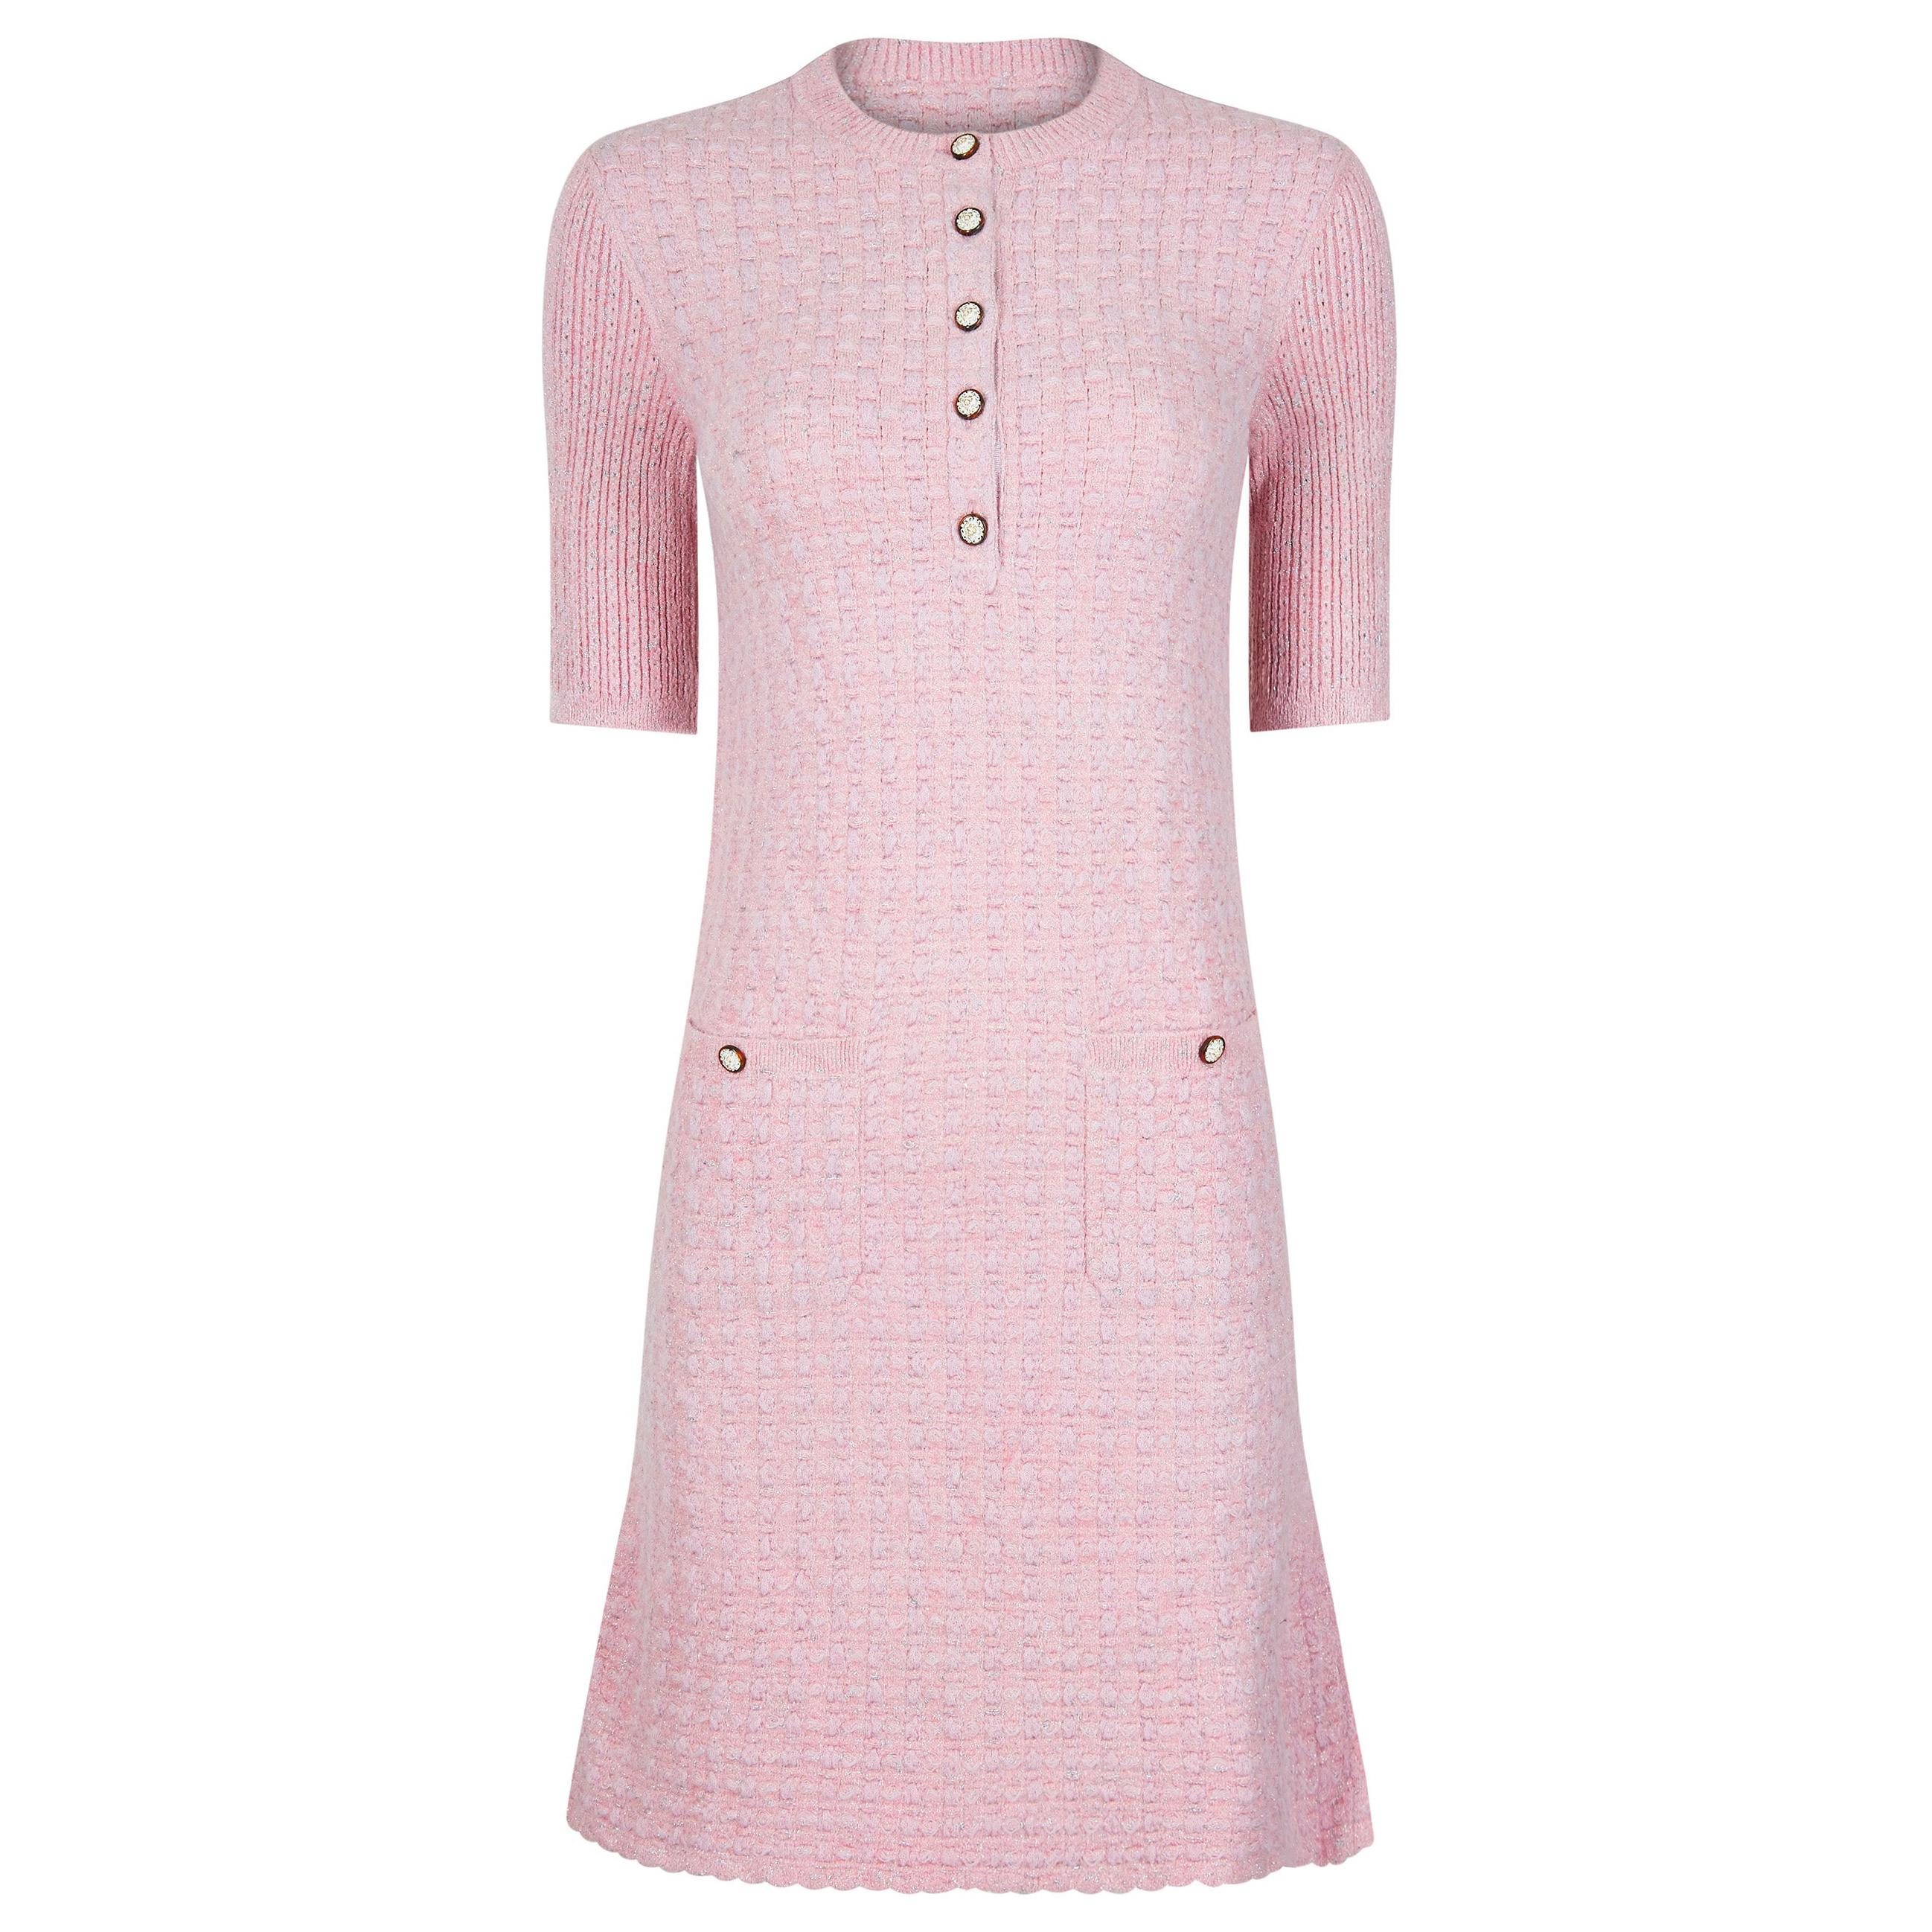 Recent Chanel Sugar Pink and Silver Fine Knit Dress With Pocket